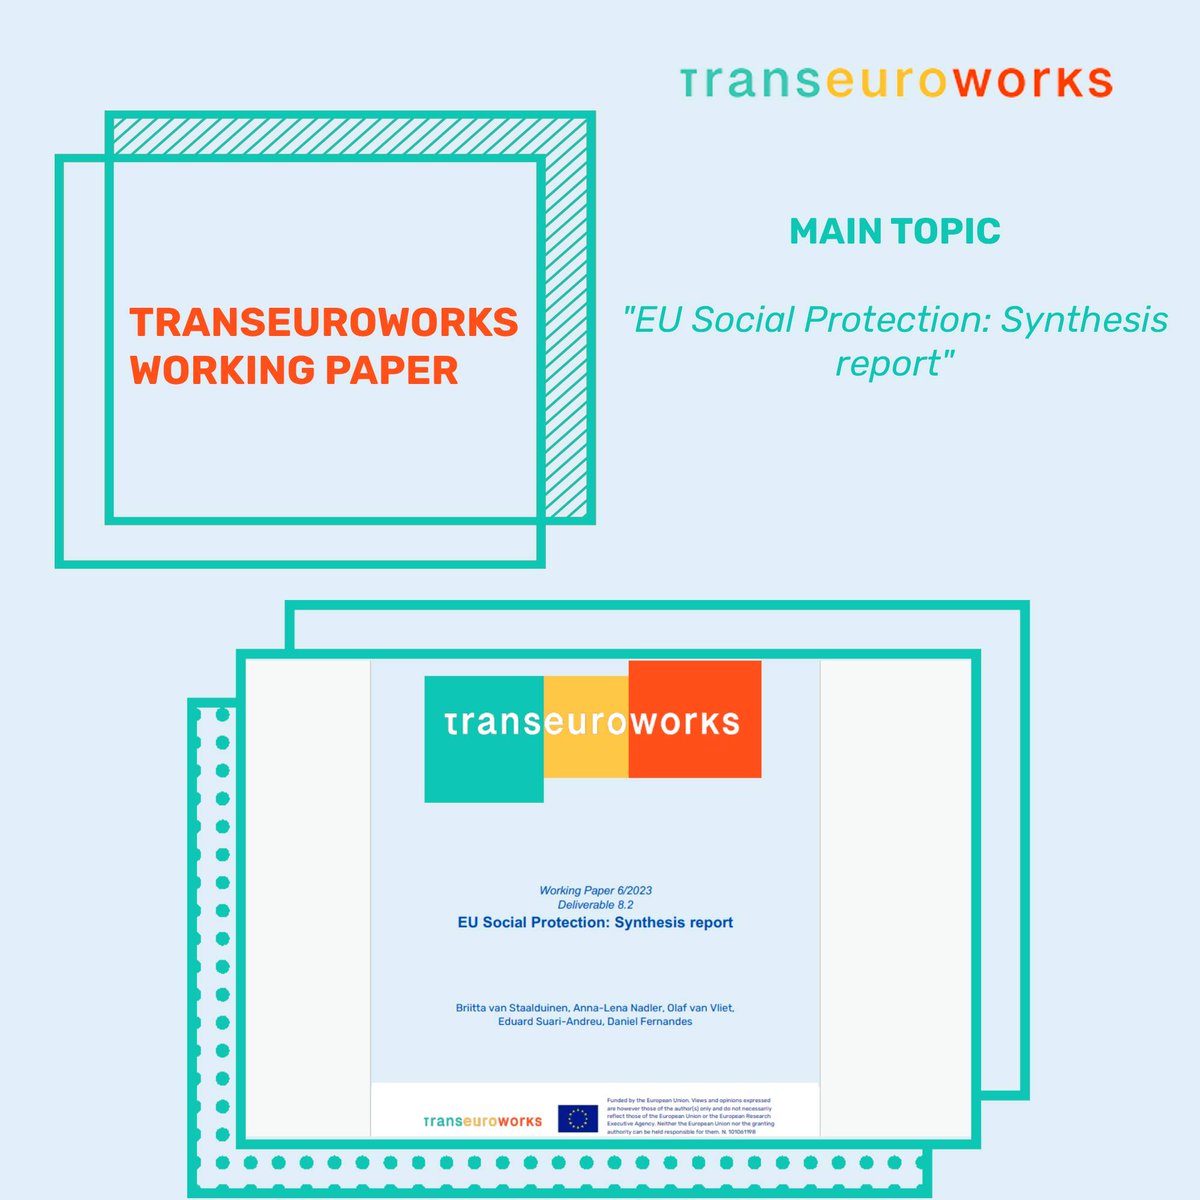 @transeuroworks Working Paper is out!💥 Read our paper on '#𝐄𝐔 #𝐒𝐨𝐜𝐢𝐚𝐥𝐏𝐫𝐨𝐭𝐞𝐜𝐭𝐢𝐨𝐧: 𝐒𝐲𝐧𝐭𝐡𝐞𝐬𝐢𝐬 𝐫𝐞𝐩𝐨𝐫𝐭' authored by our partners from the @EconomicsLeiden! 👉Read the full report:l1nq.com/FLiZ5🔥 #socialpolicy #socialrisks #socialinequality